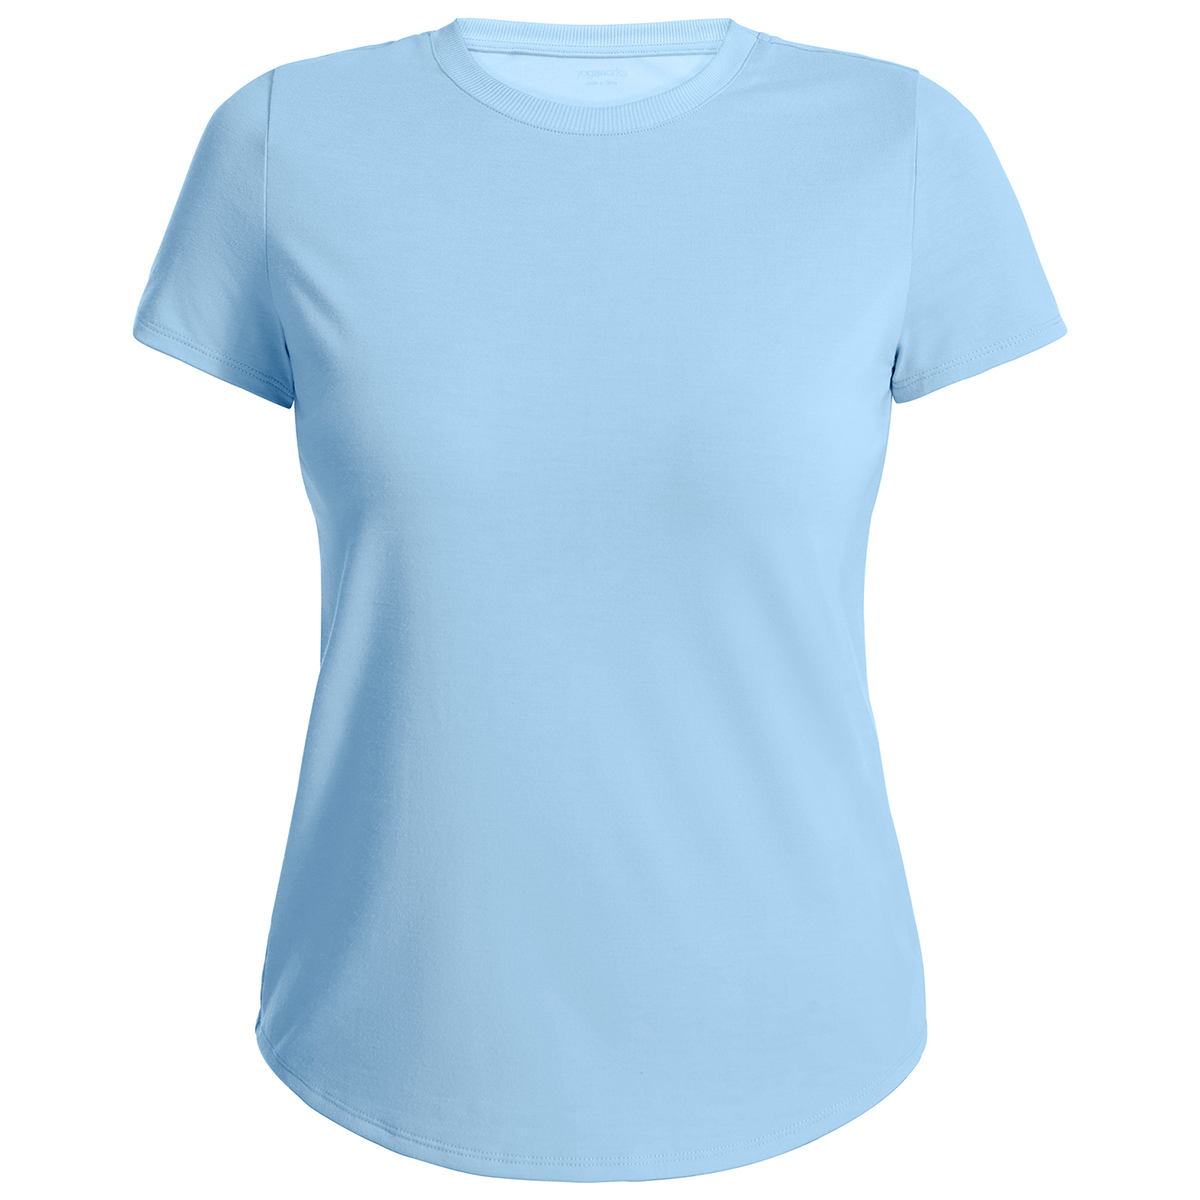 Yogaworks Women's Short-Sleeve Fitted Performance Tee